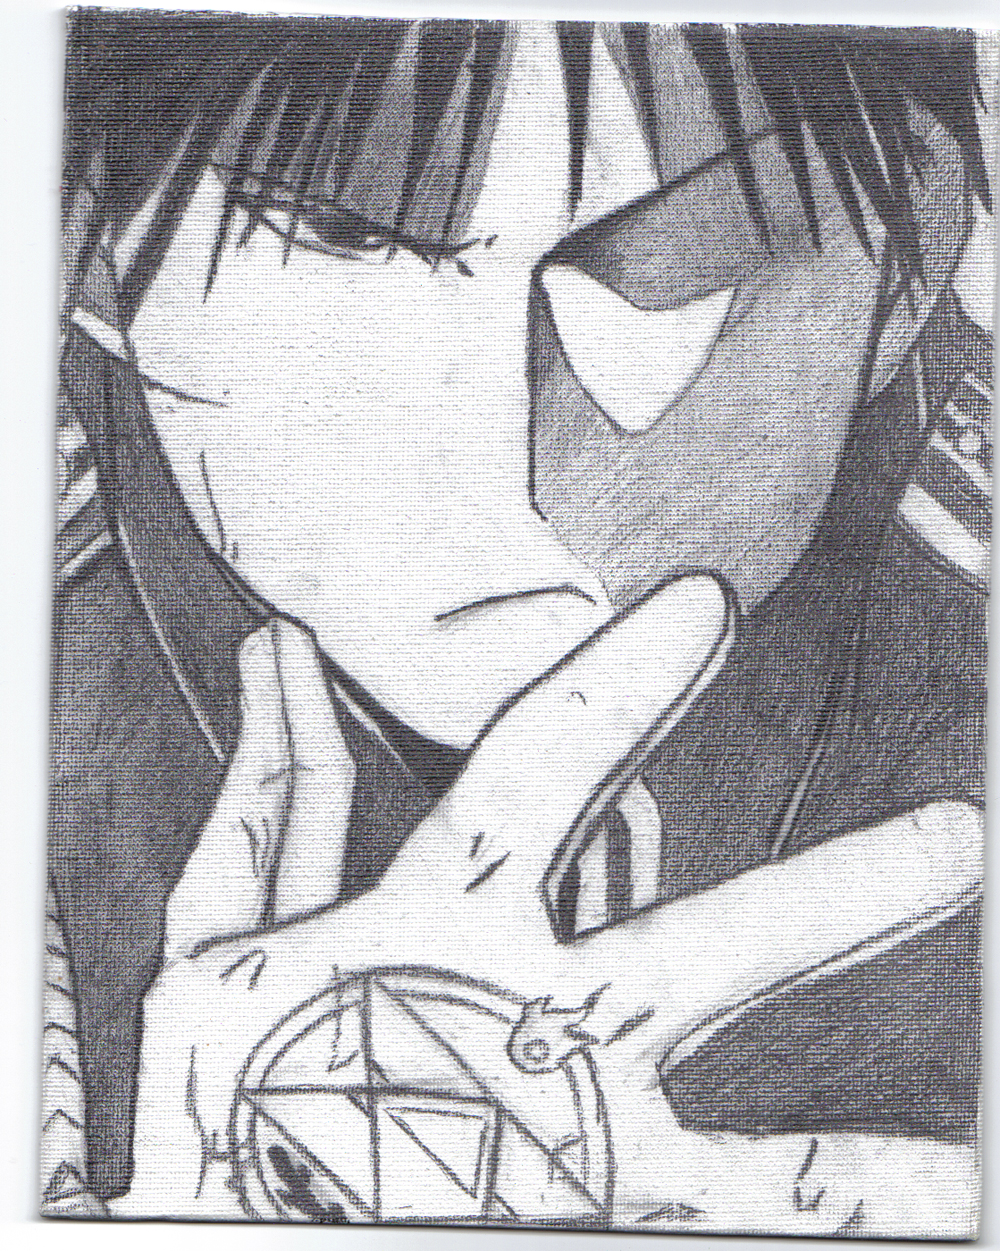 Roy Mustang by chaosalchemist